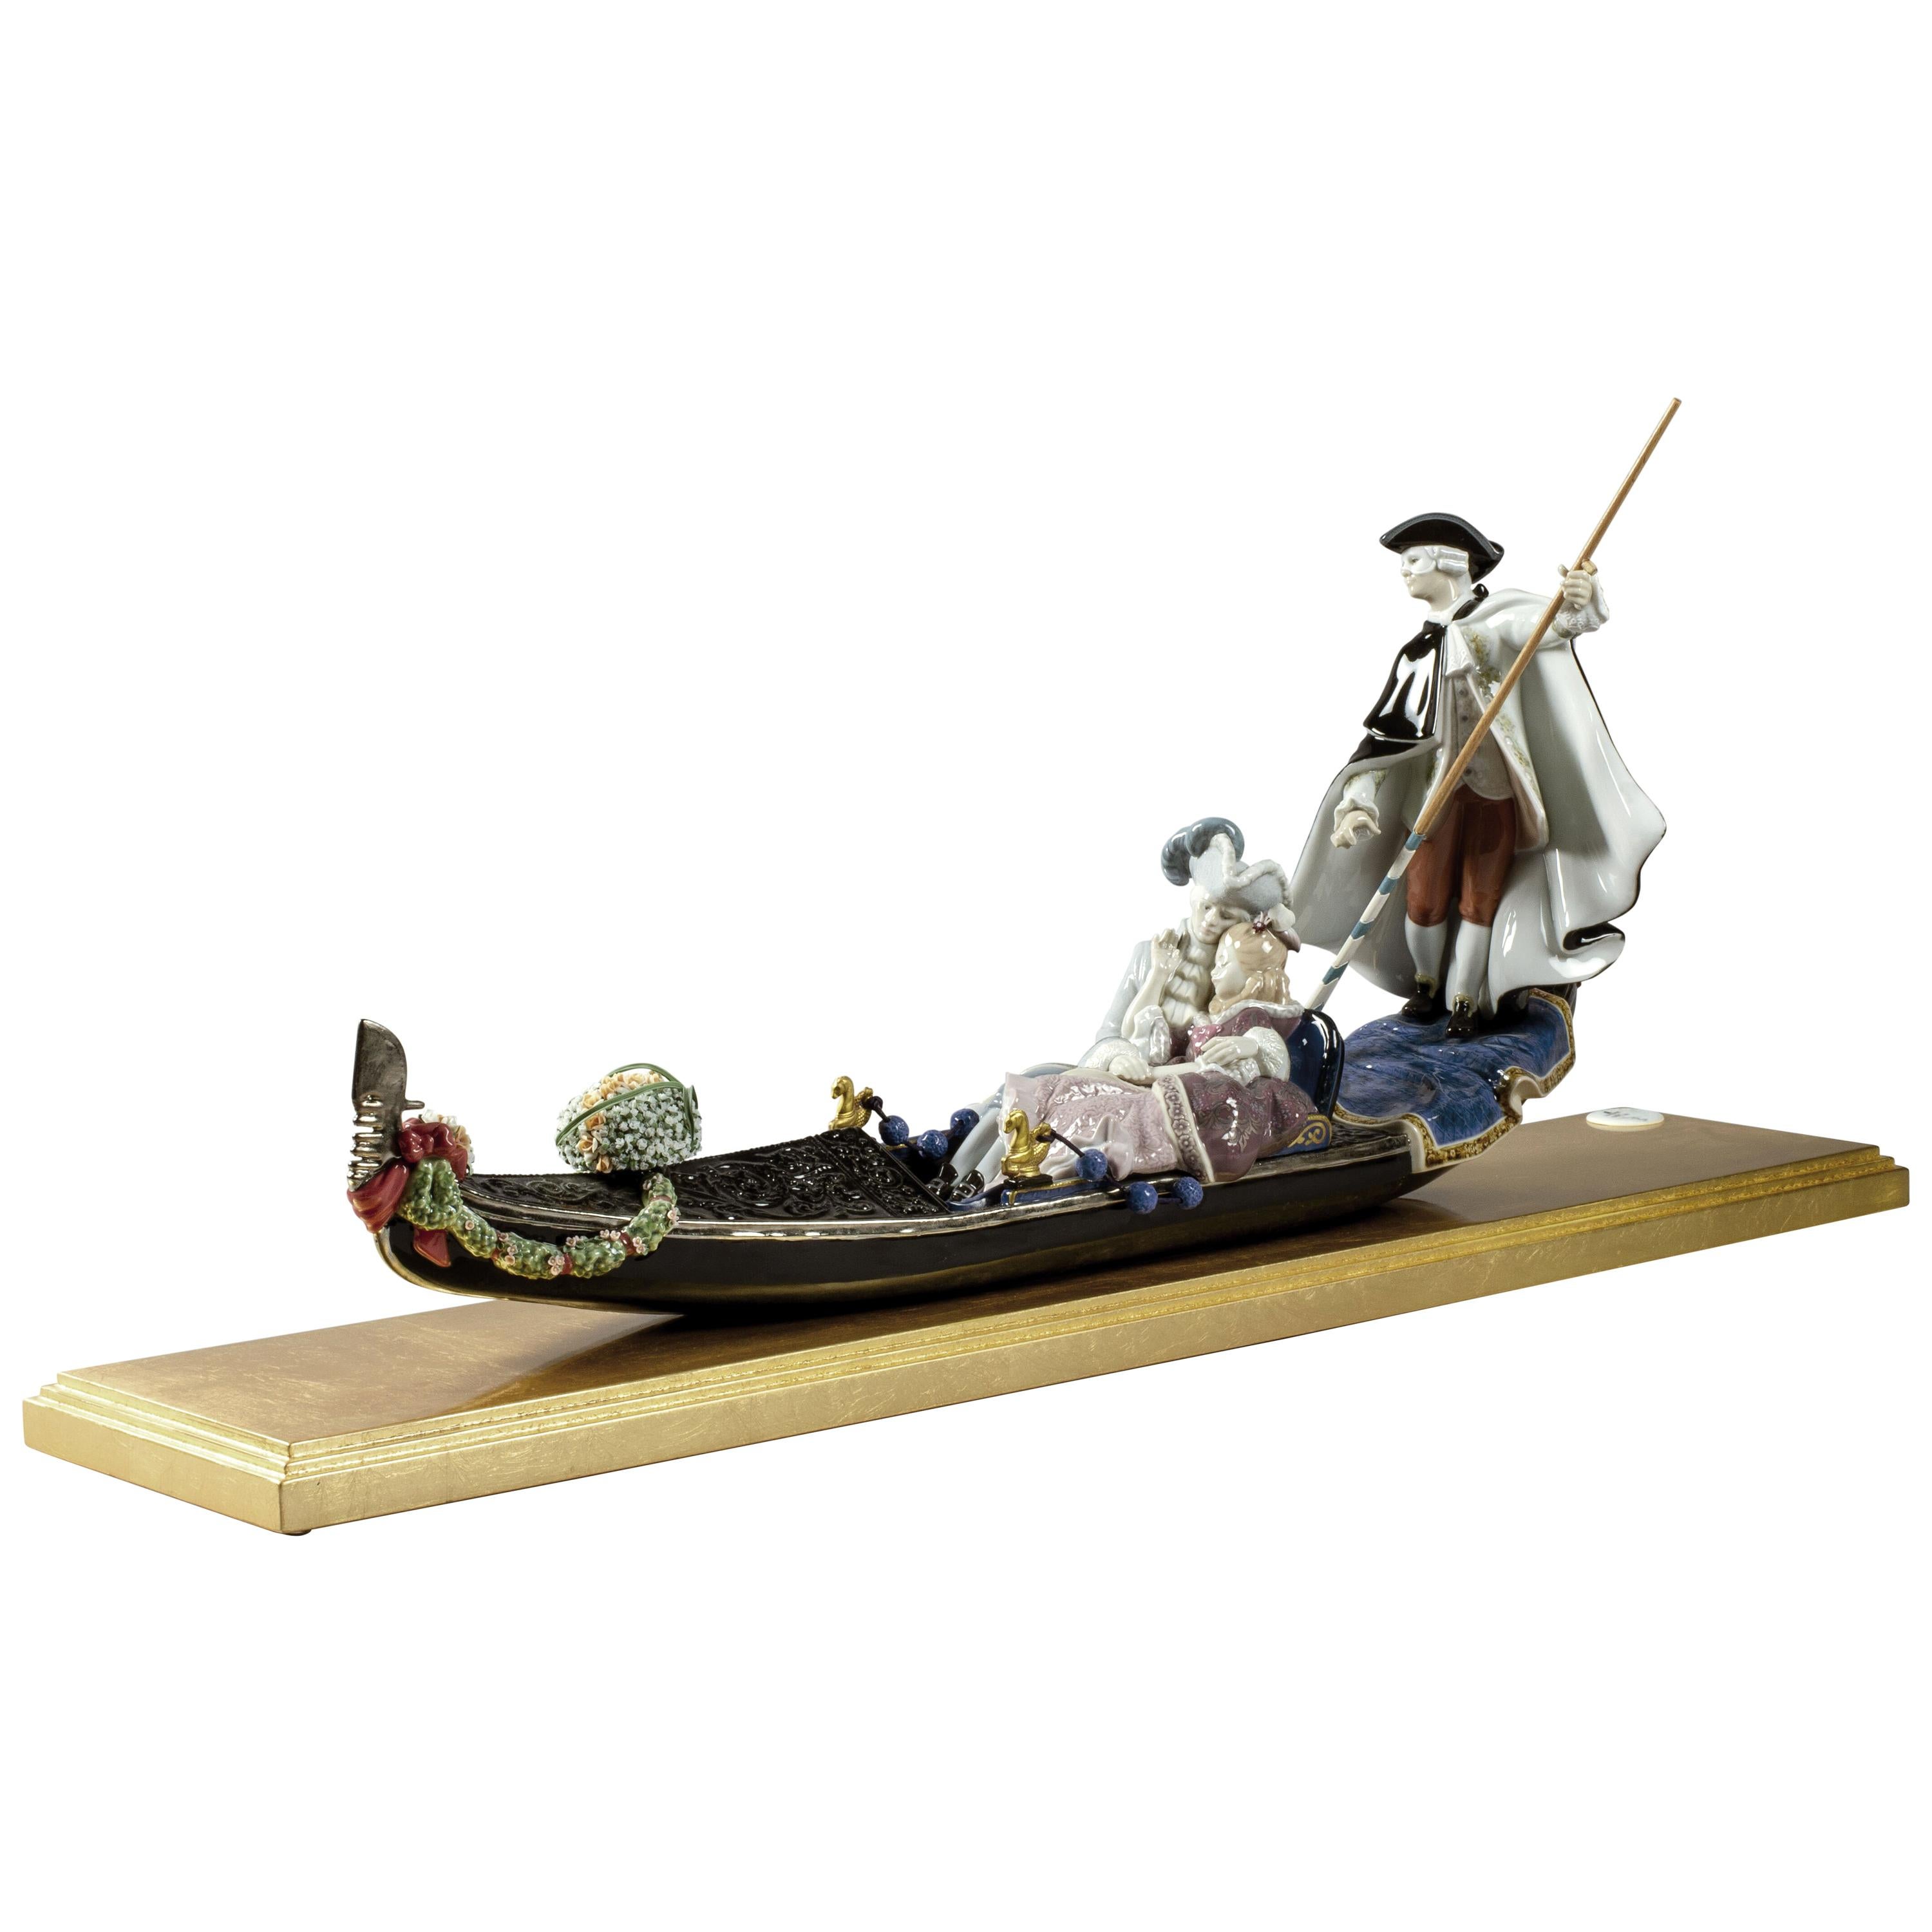 Gondola in Venice Sculpture, Limited Edition For Sale